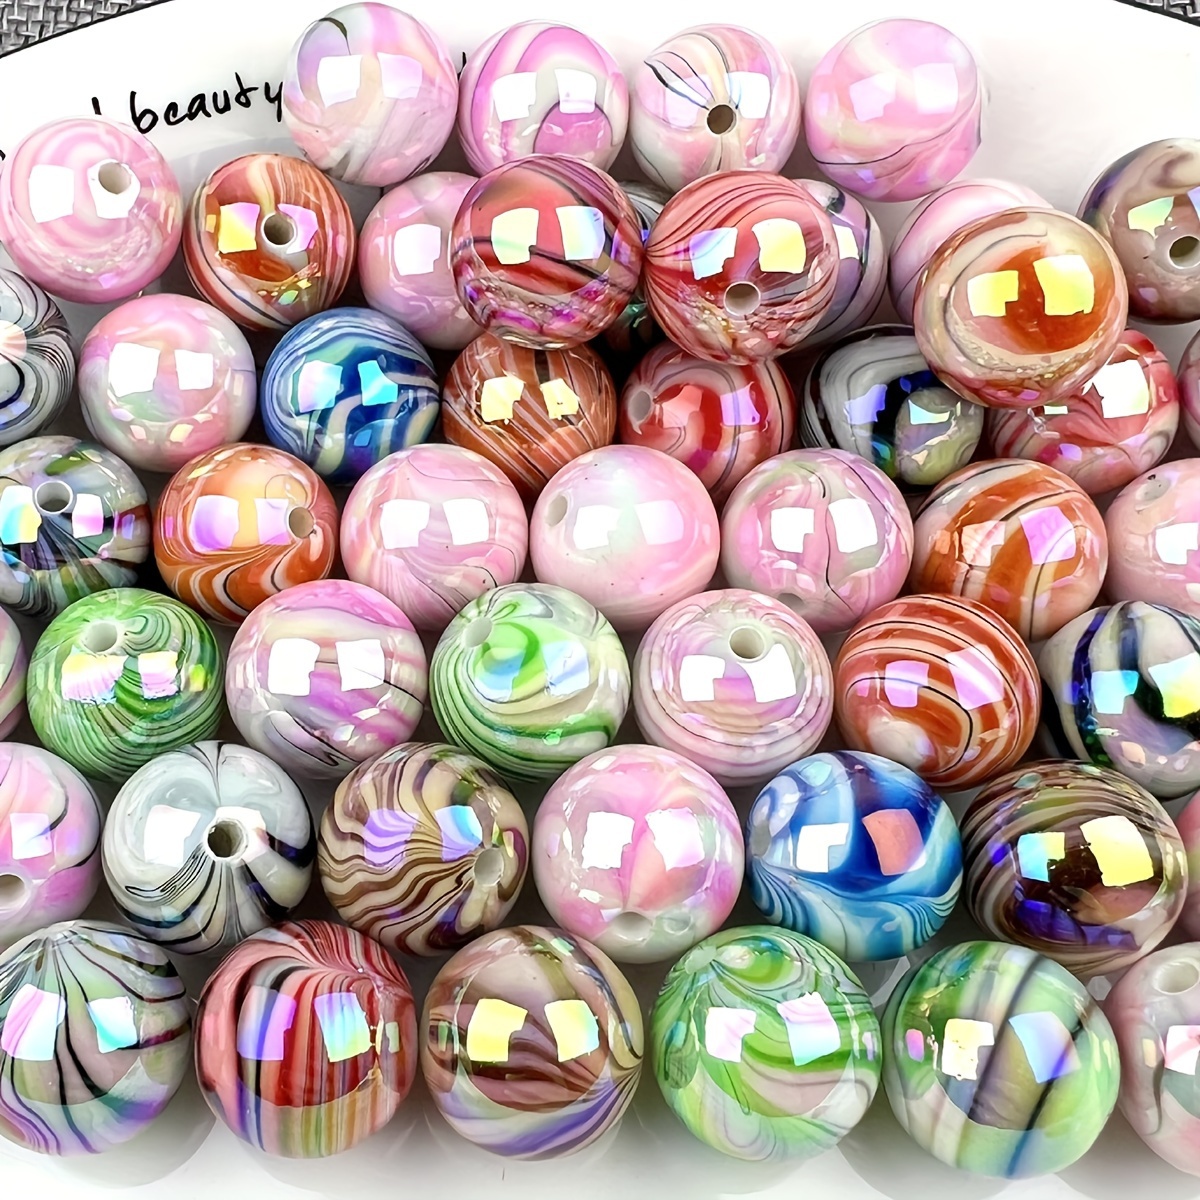 

25-50pcs/set 8-10mm Water Ripple Round Beads Ab Color Diy Mixed Color Series Can Be Used To Make Bracelets, Necklaces, And Mobile Phone Chains